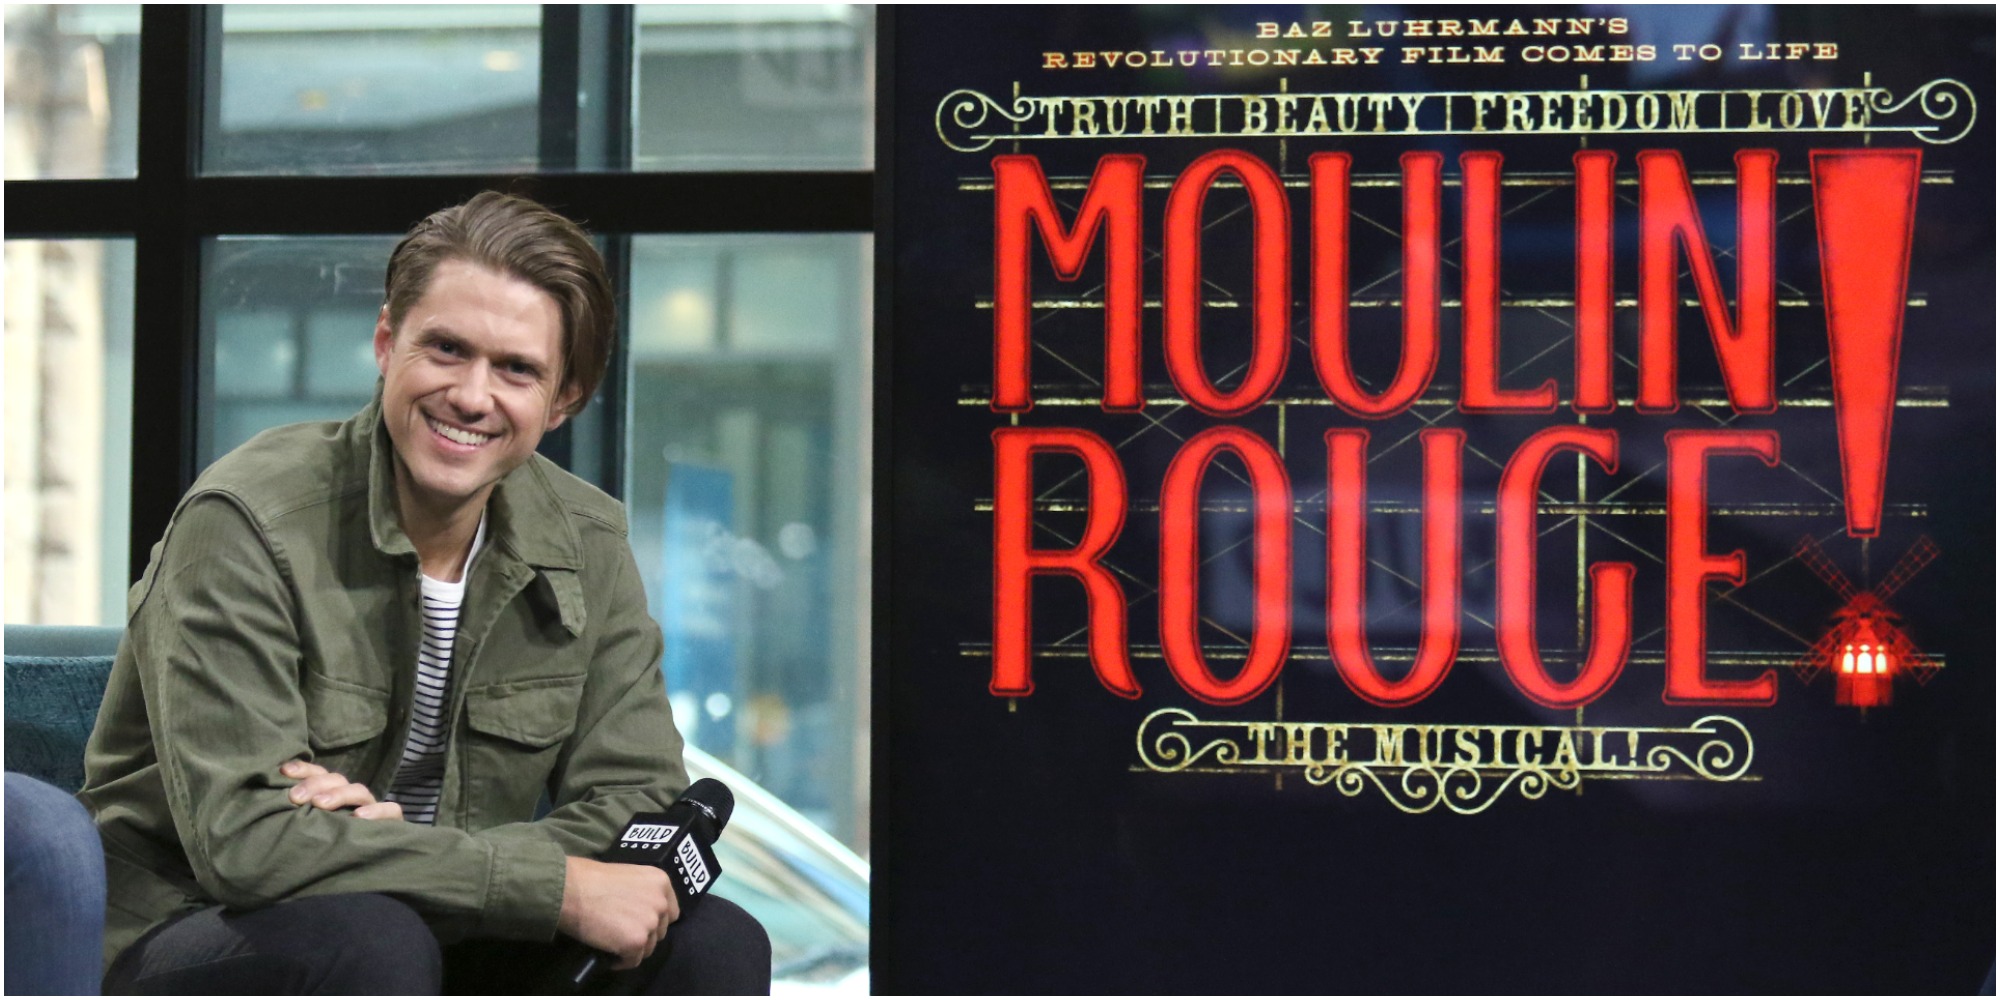 Aaron Tveit discusses his role of poet Christian in Moulin Rouge! The Musical.